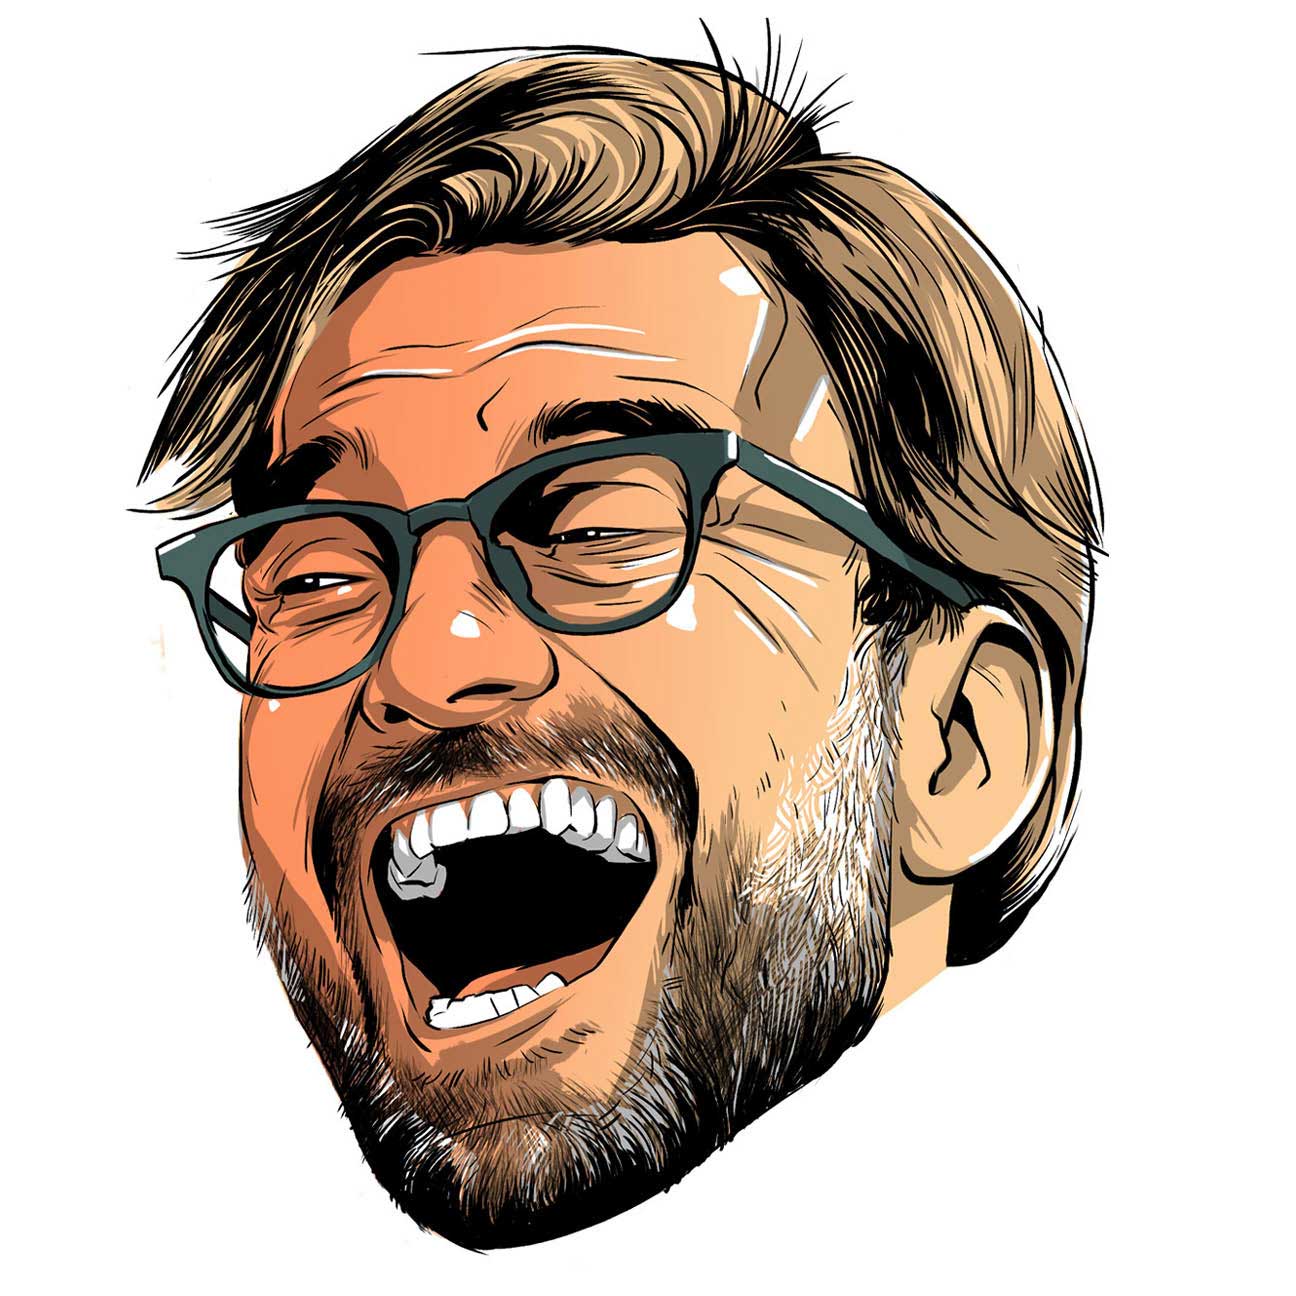 Jurgen Klopp Liverpool manager is a man with many faces - ESPN FC1296 x 1296